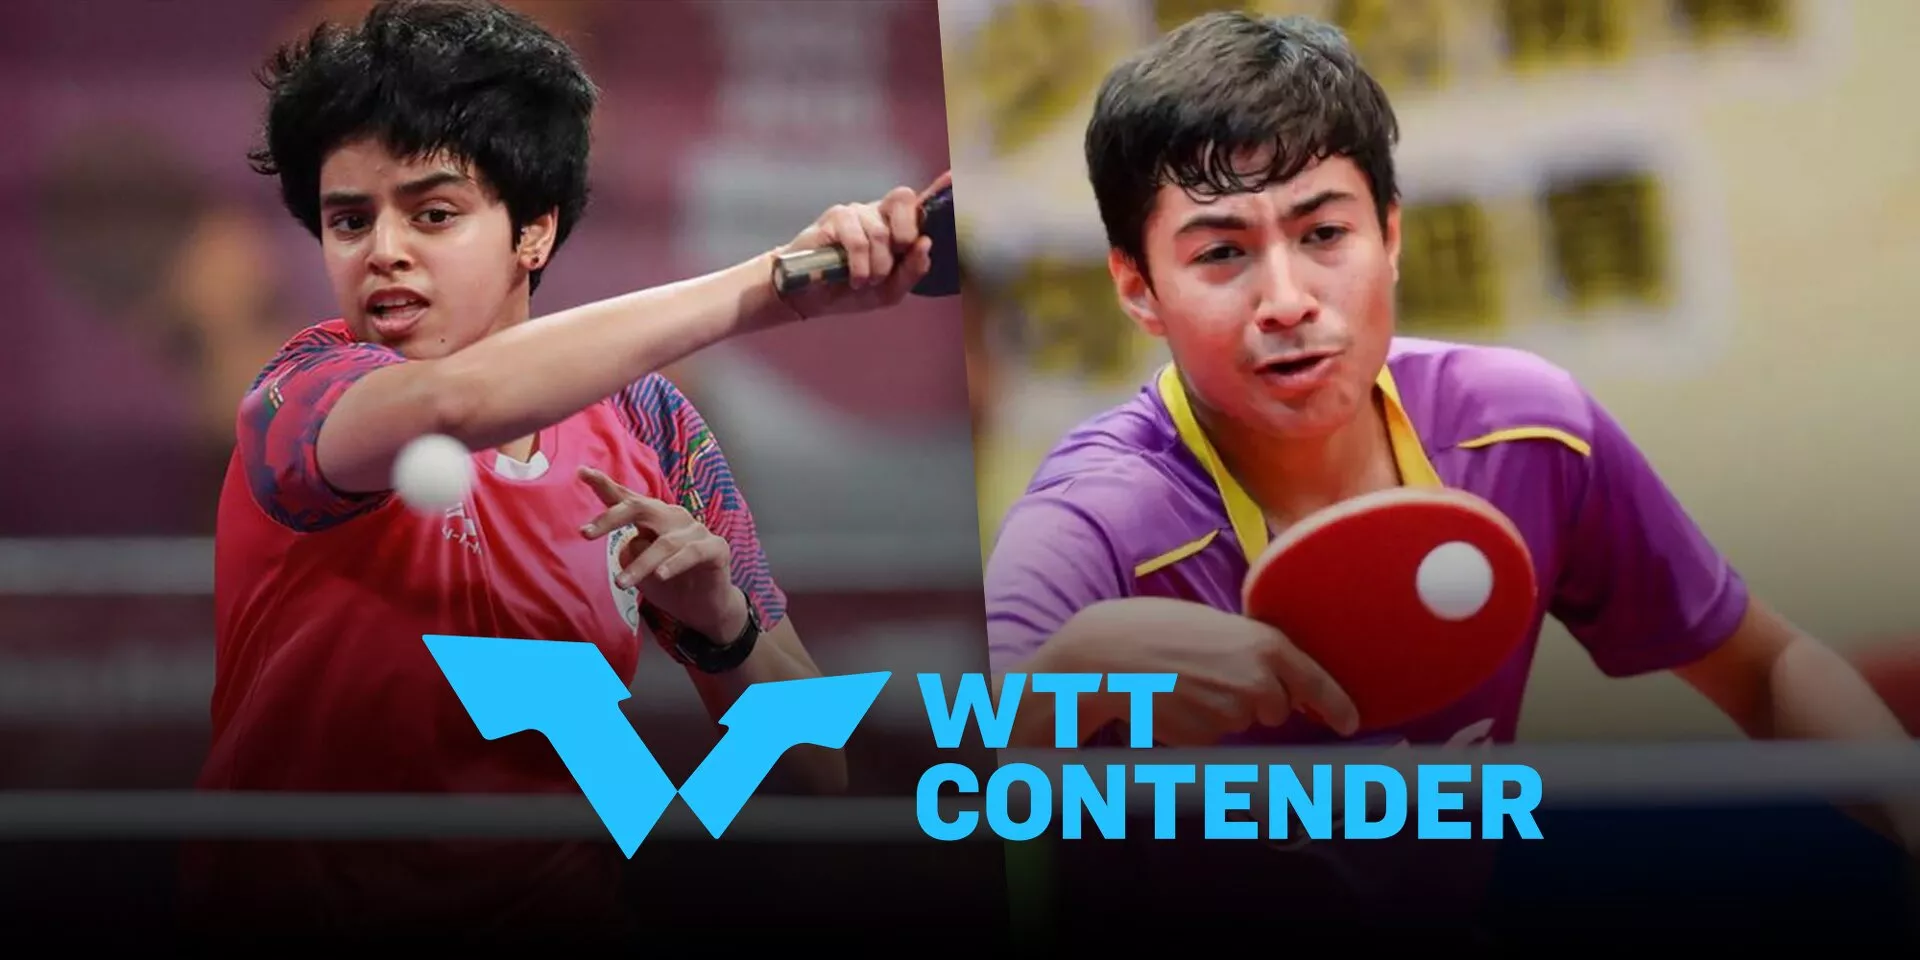 WTT Contender Almaty 2023 Full schedule, fixtures, results, live streaming details